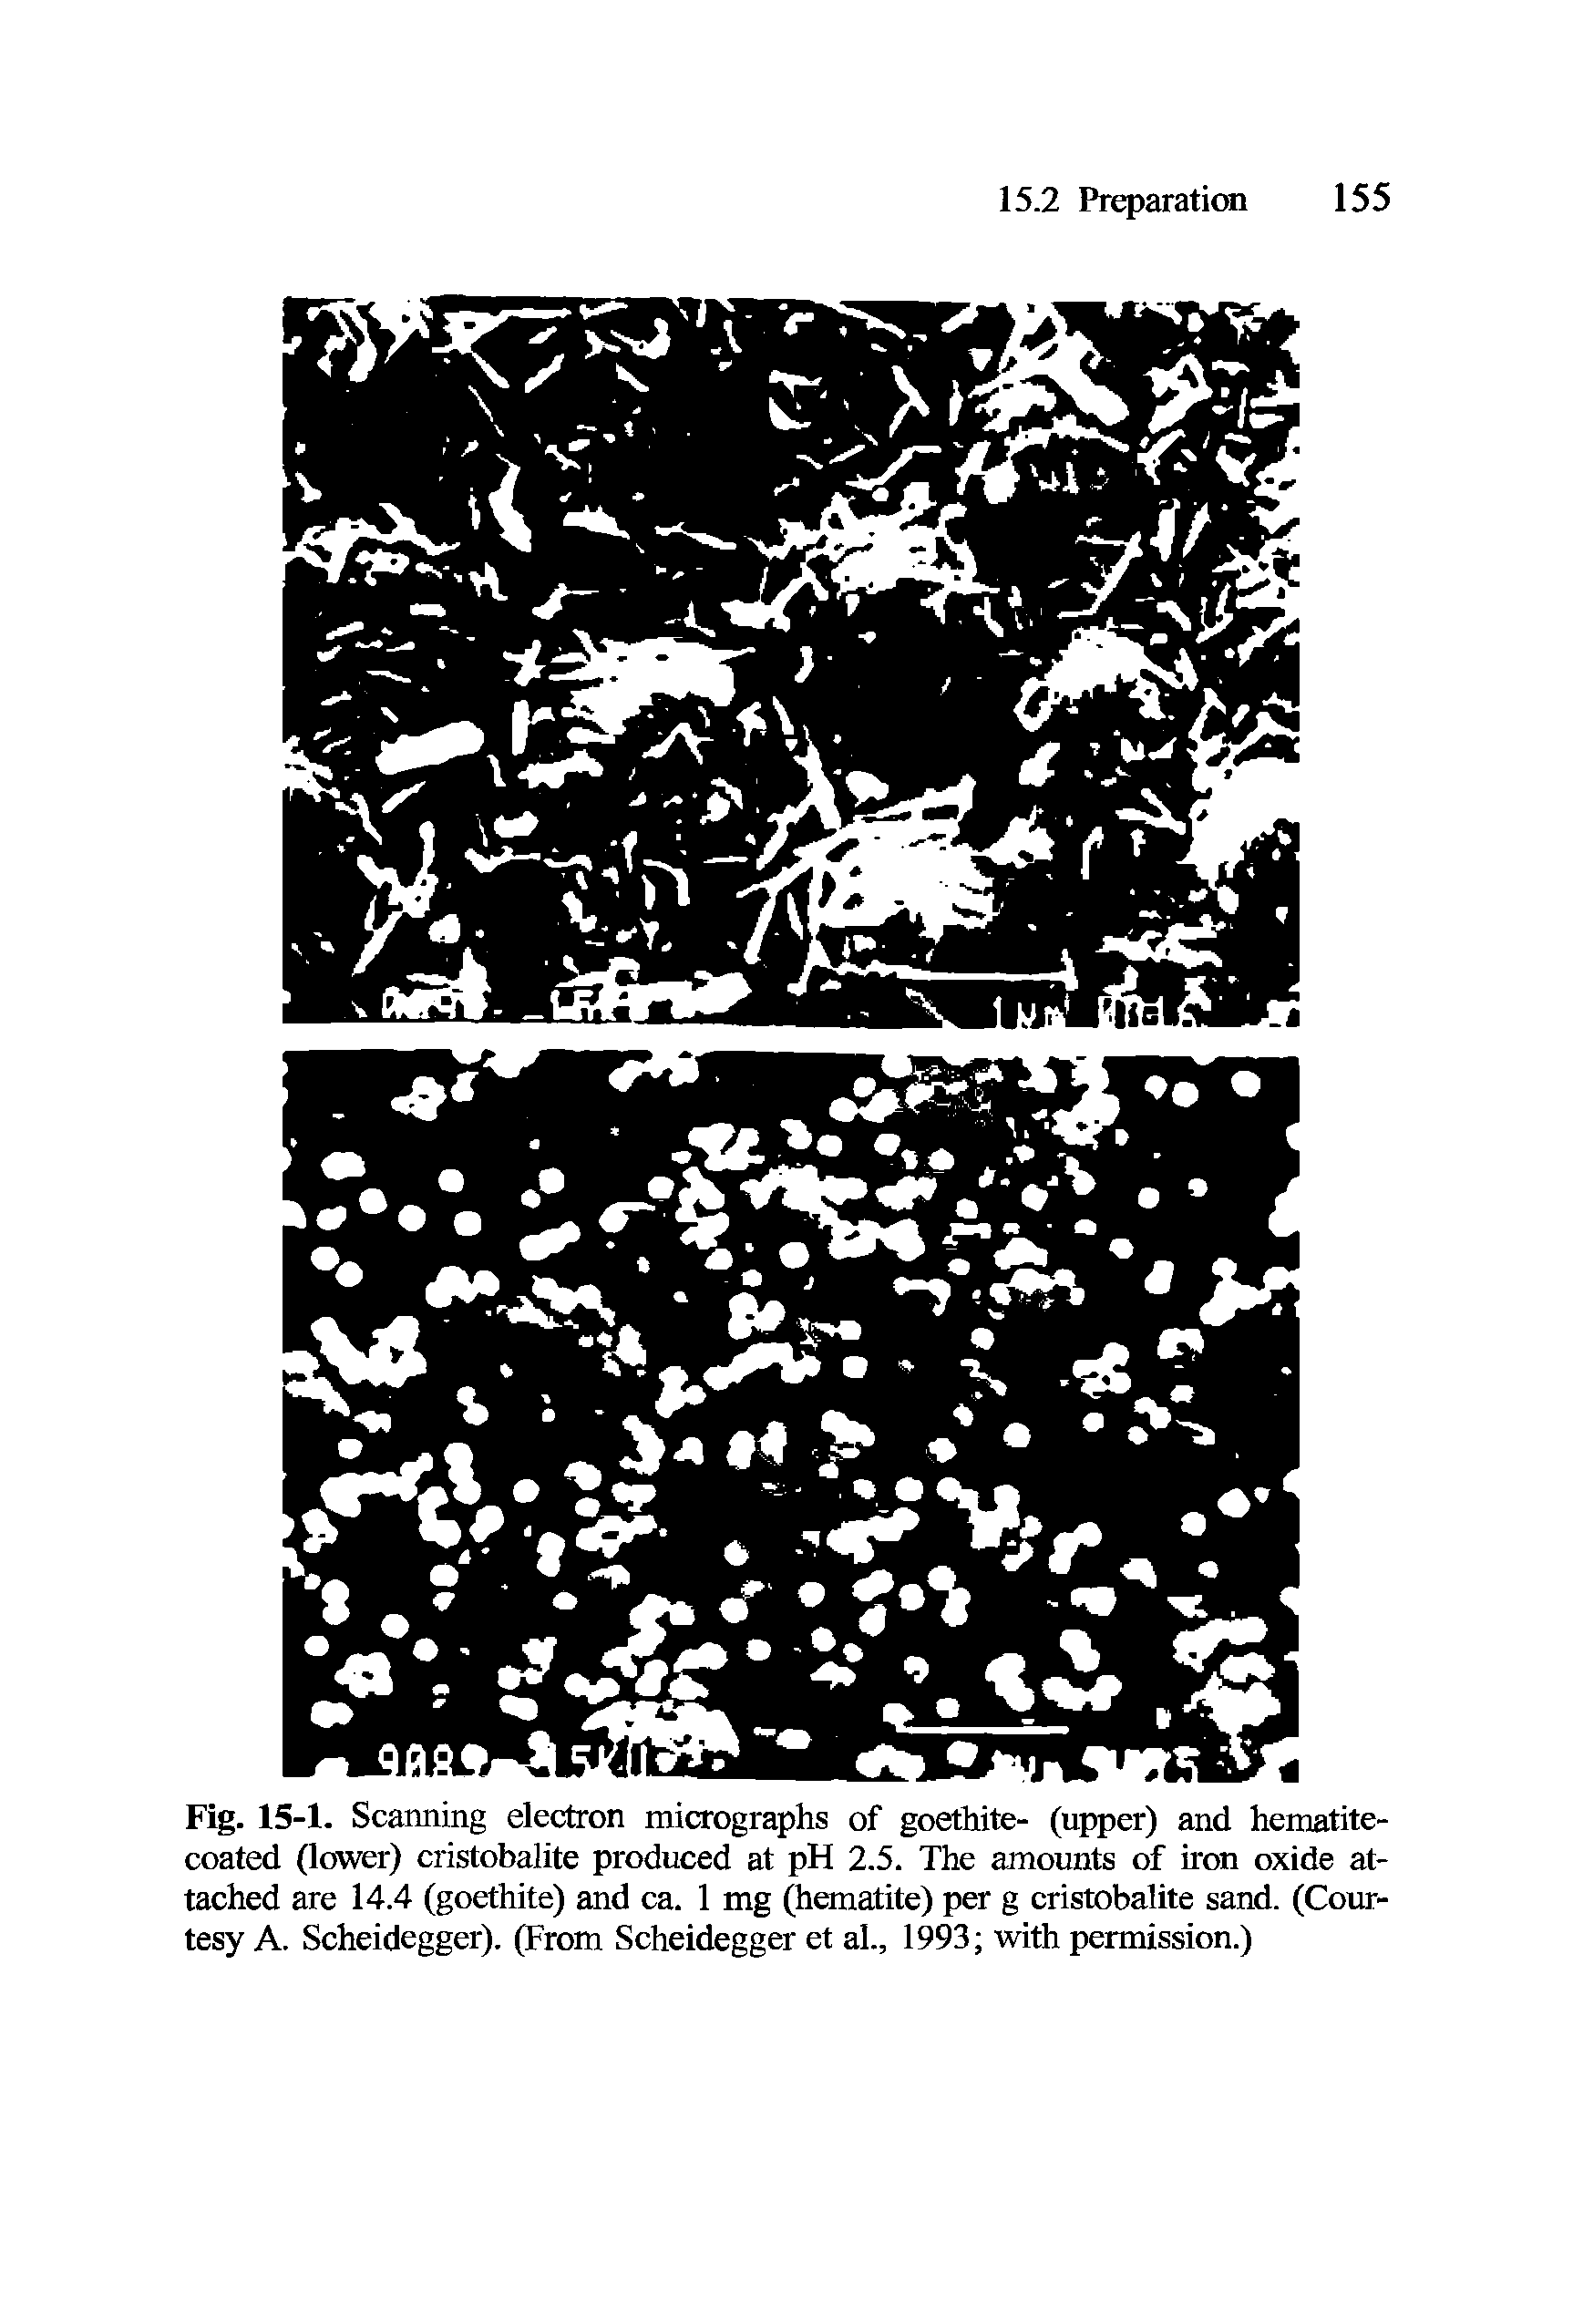 Fig. 15-1. Scanning electron micrographs of goethite- (upper) and hematite-eoated (lower) cristobalite produced at pH 2.5. The amounts of iron oxide at-taehed are 14.4 (goethite) and ca. 1 mg (hematite) per g cristobalite sand. (Courtesy A. Scheidegger). (From Scheidegger et al., 1993 with permission.)...